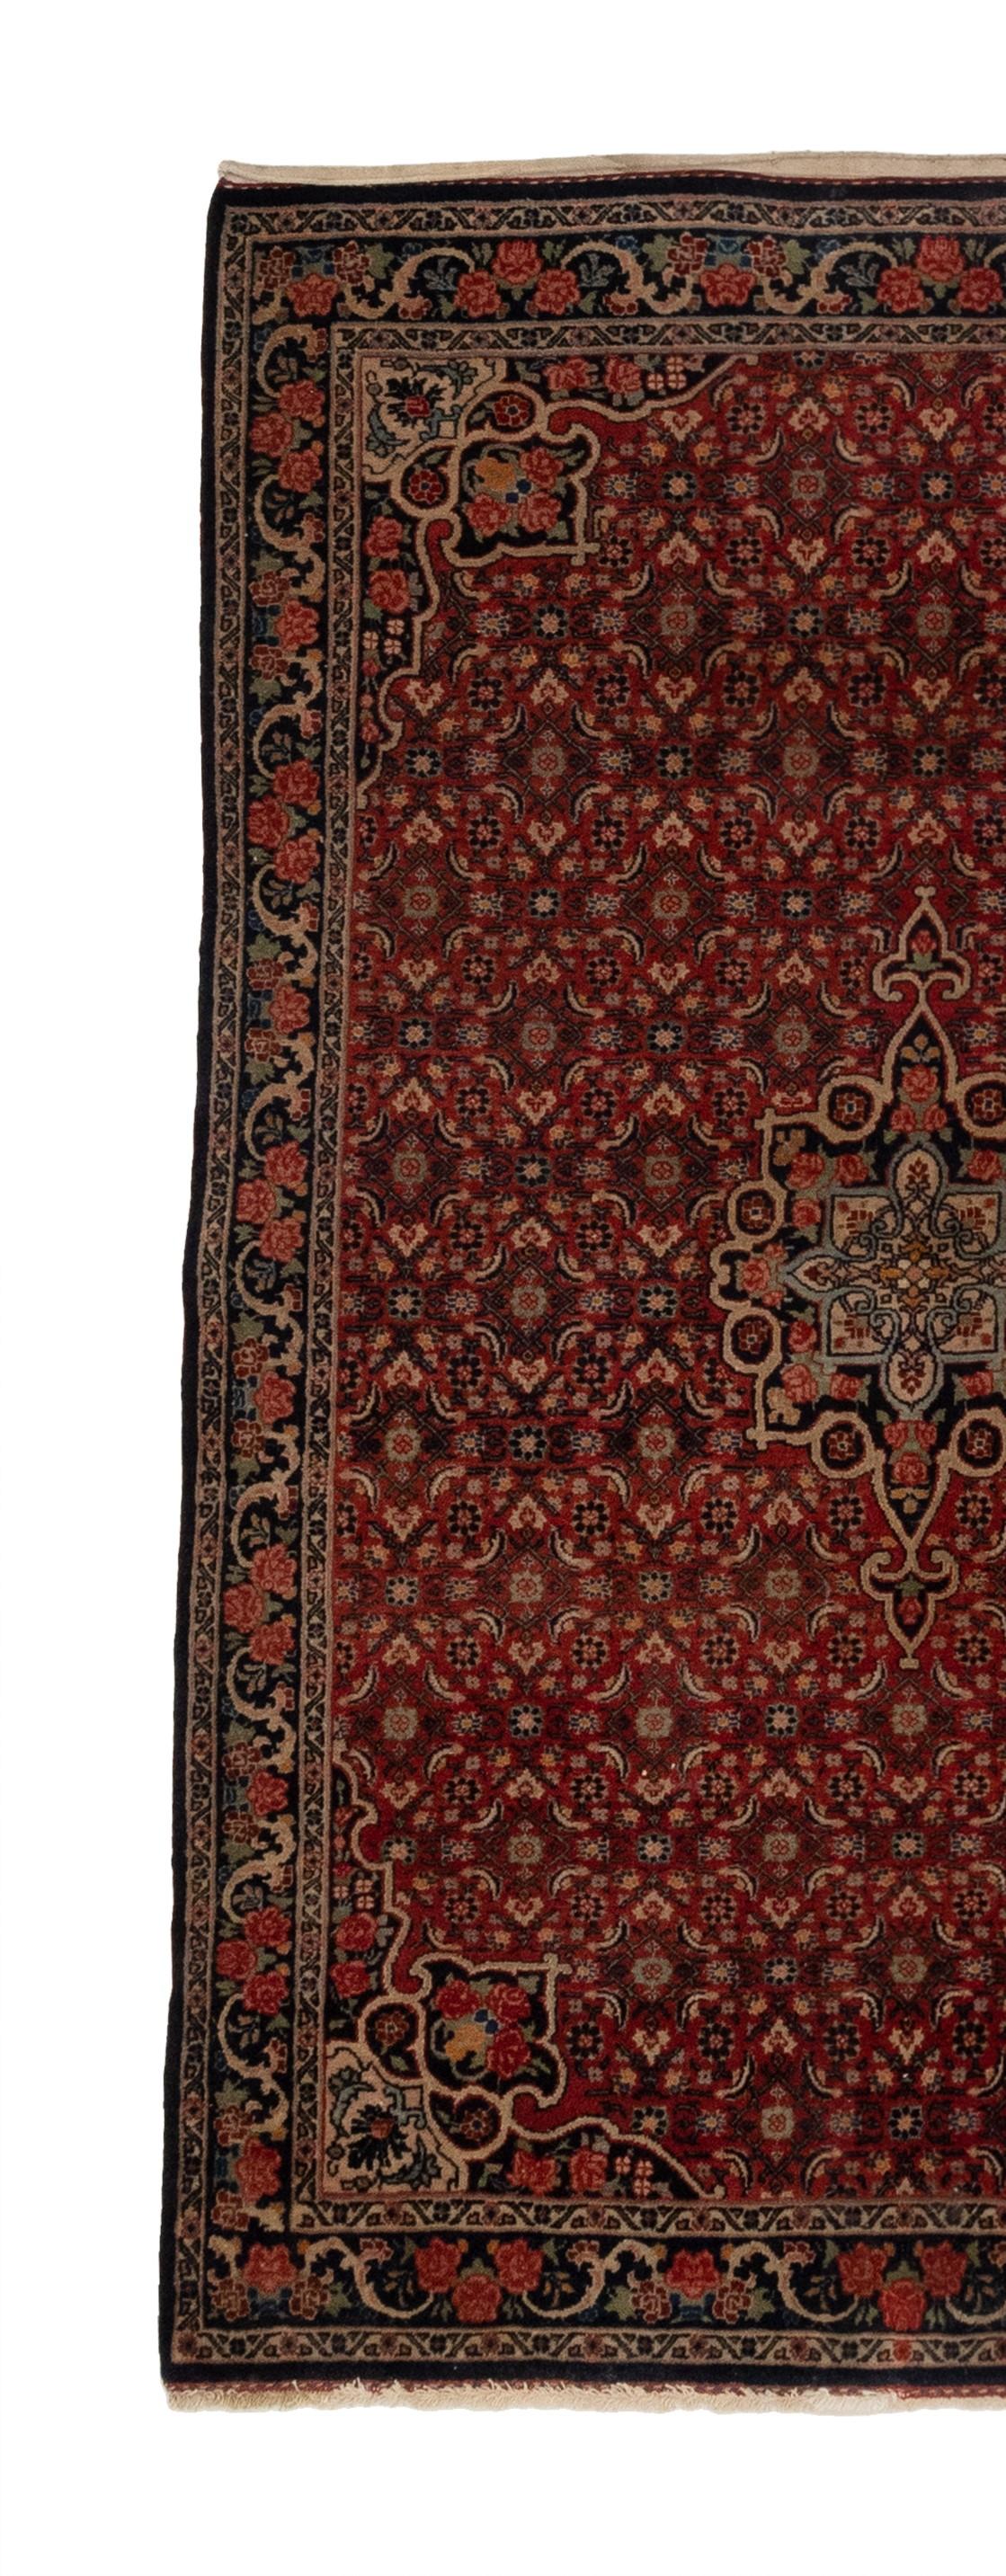 This antique Oriental rug from the 1880s boasts a stunning floral design on an ivory field. The intricate patterns and flawless craftsmanship highlight the incredible skill and creativity that went into making it. Its timeless beauty and exquisite